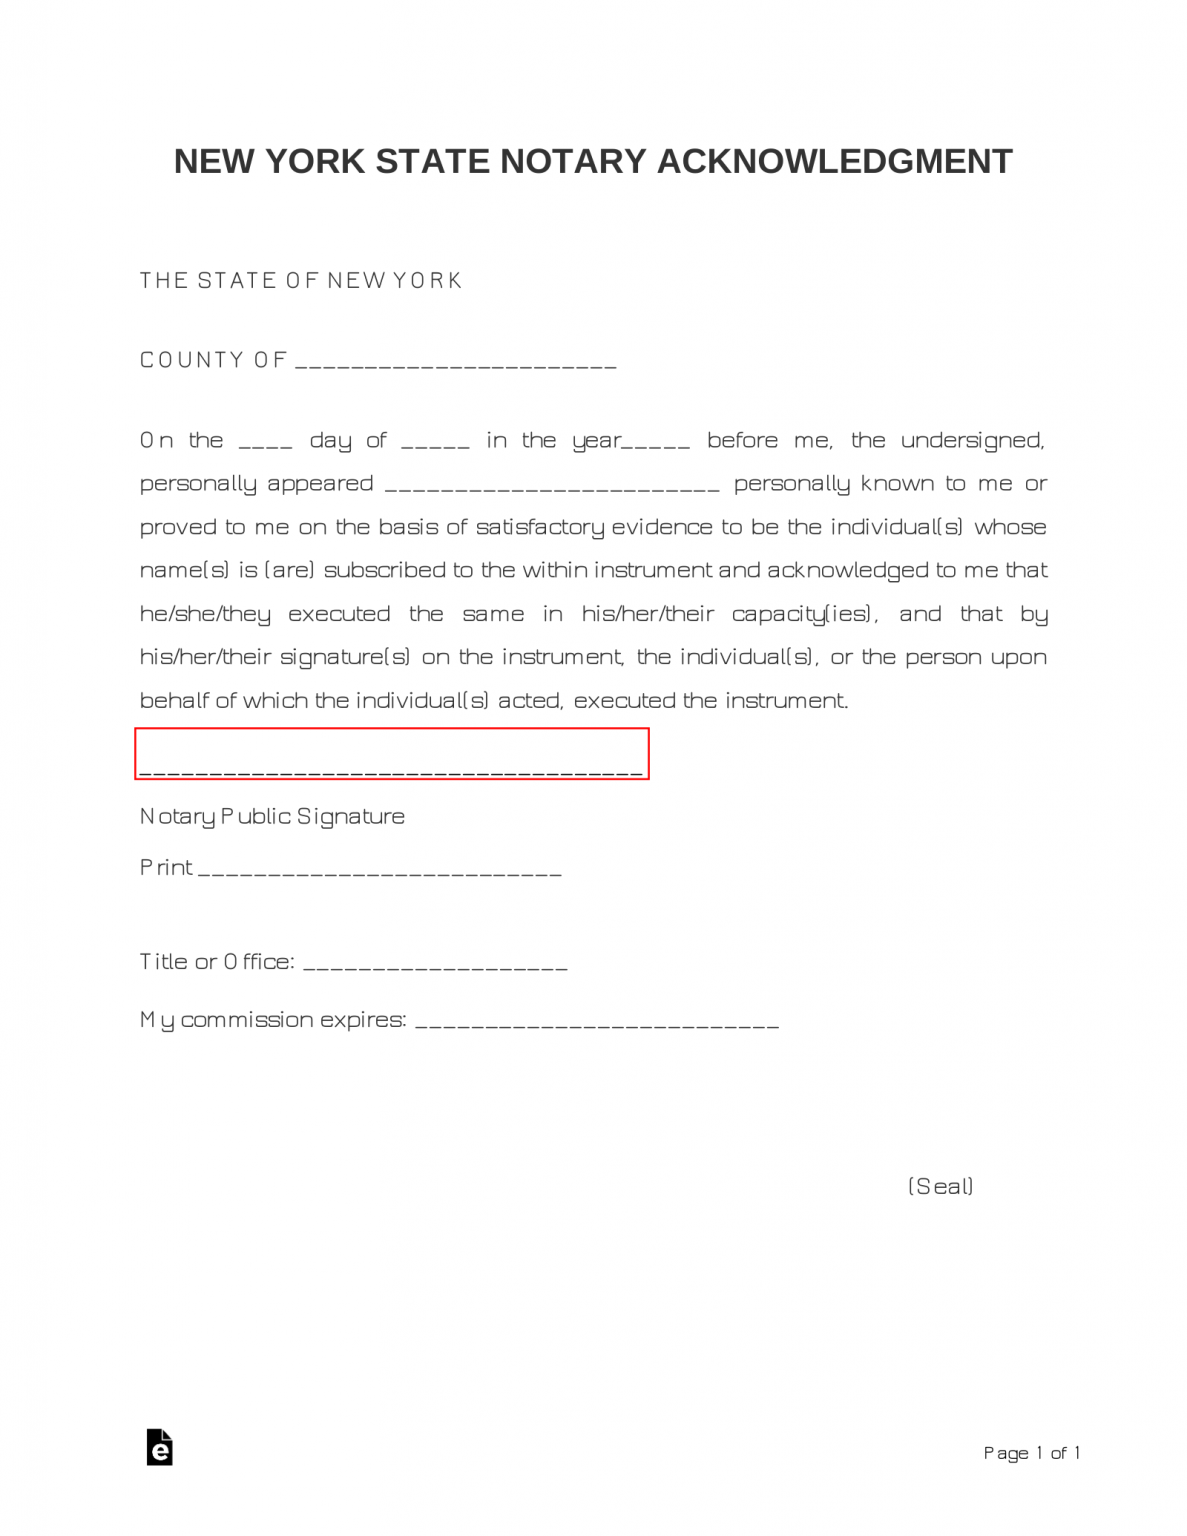 does a promissory note need to be notarized